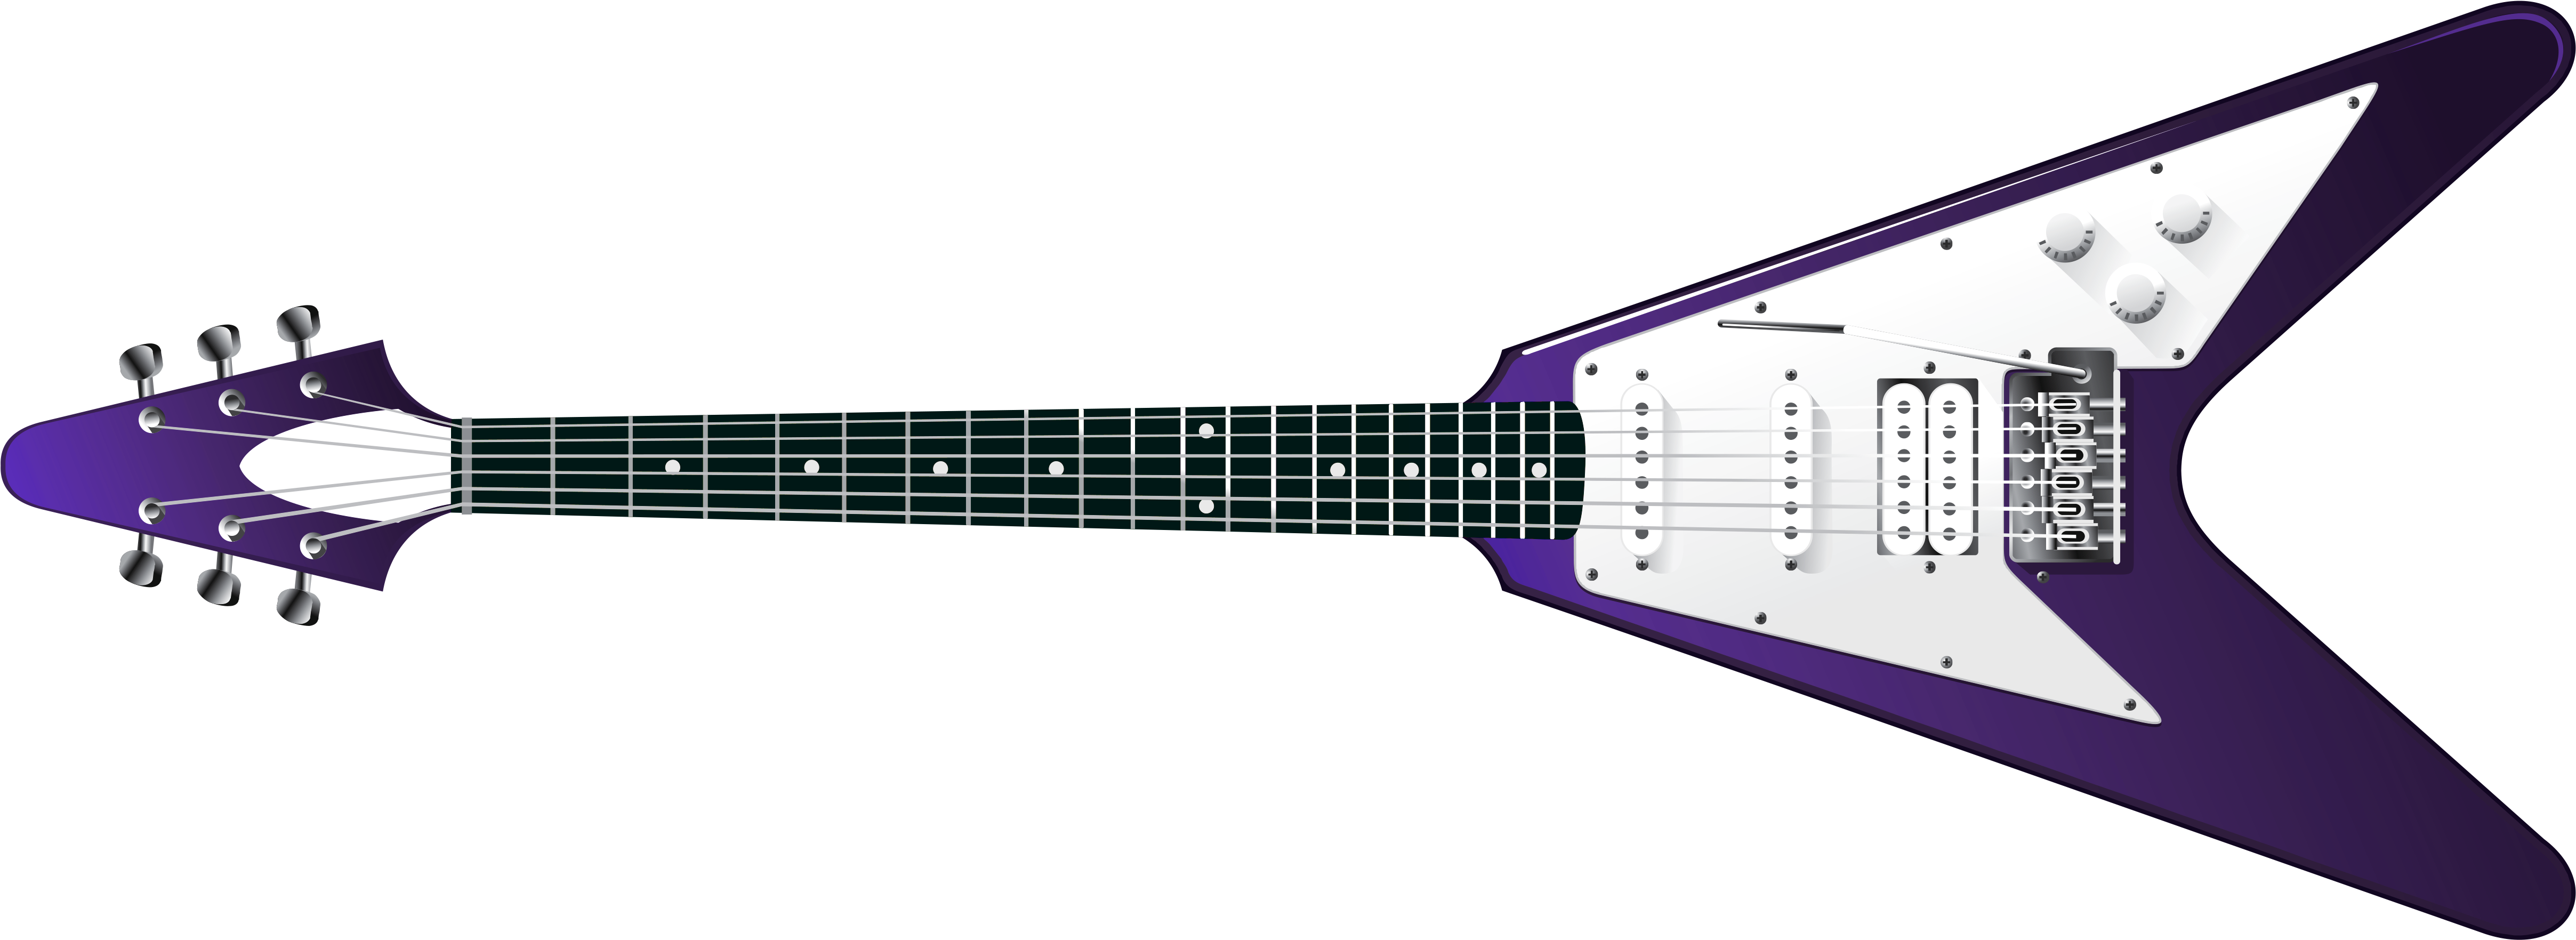 Download PNG image - Purple Electric Guitar PNG 